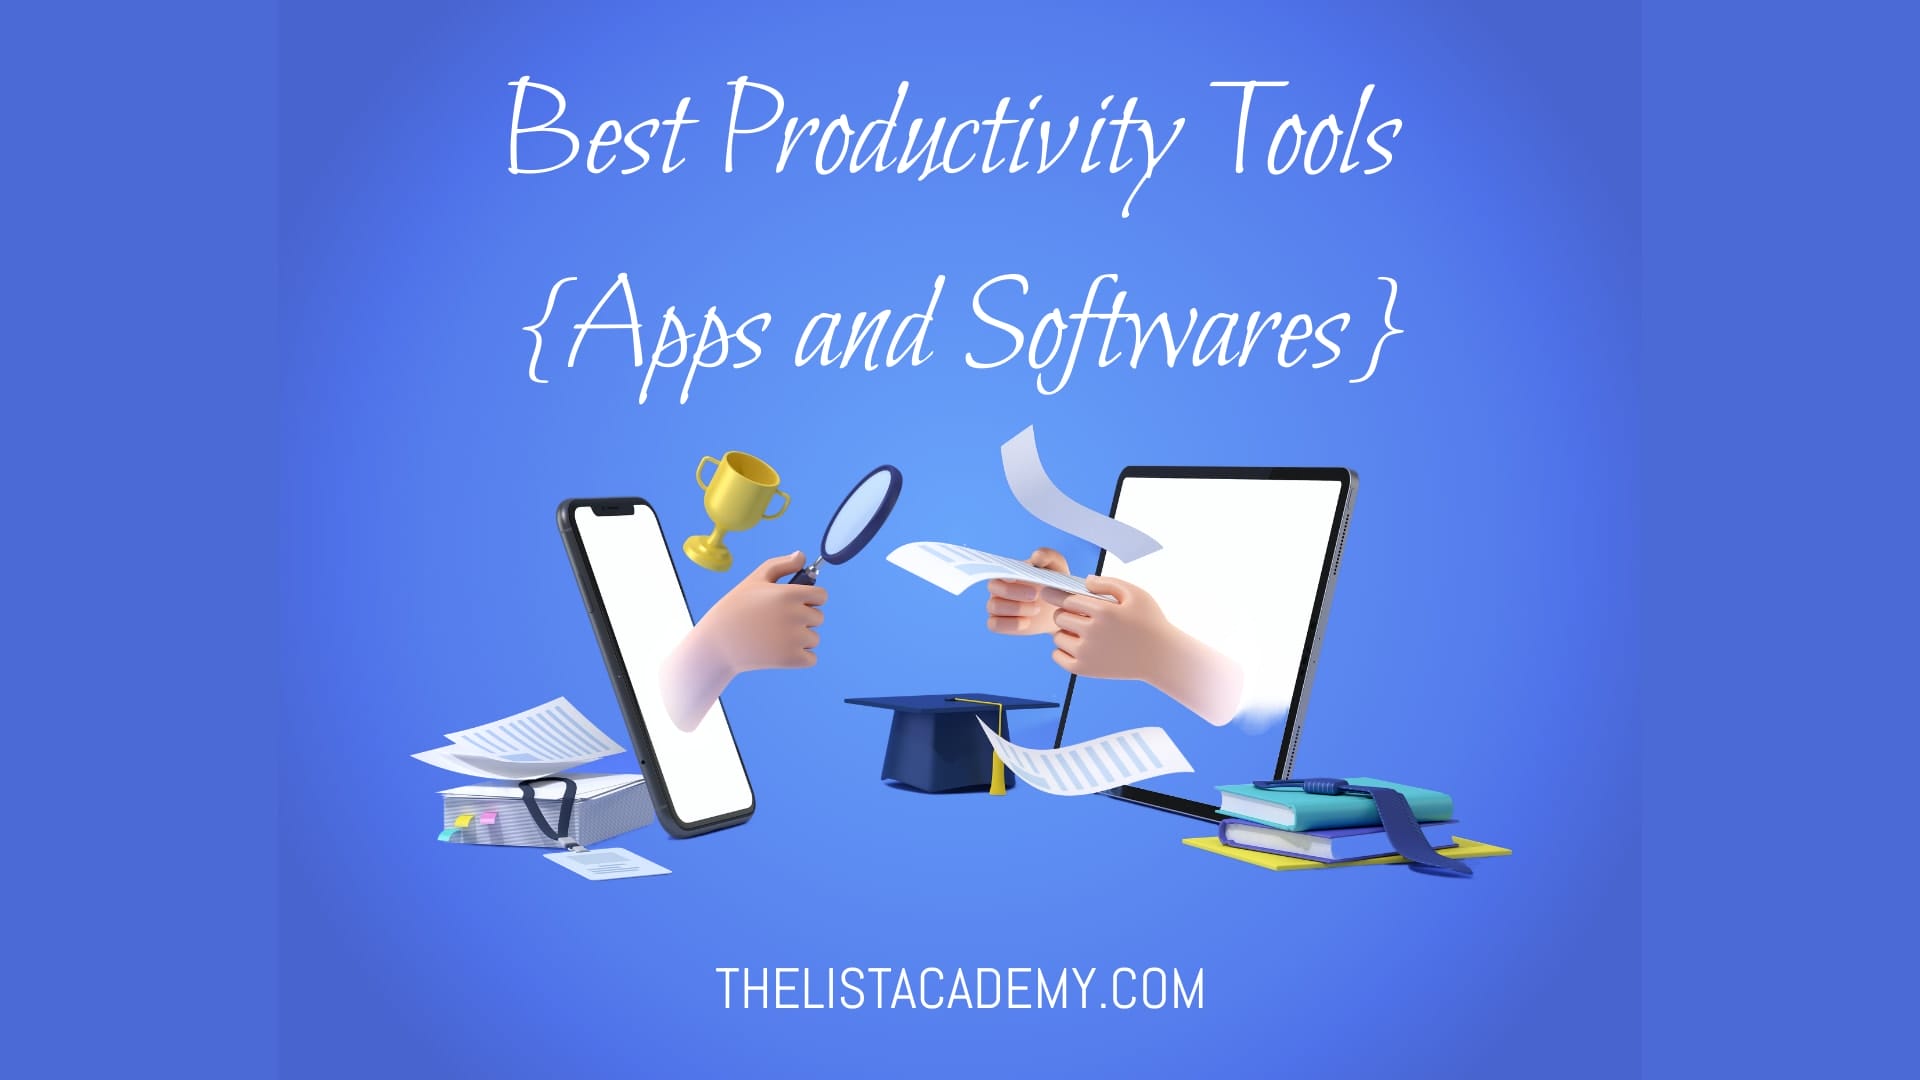 Cover Image For List : 90 Productivity Tools - List Of Best Productivity Apps And Softwares